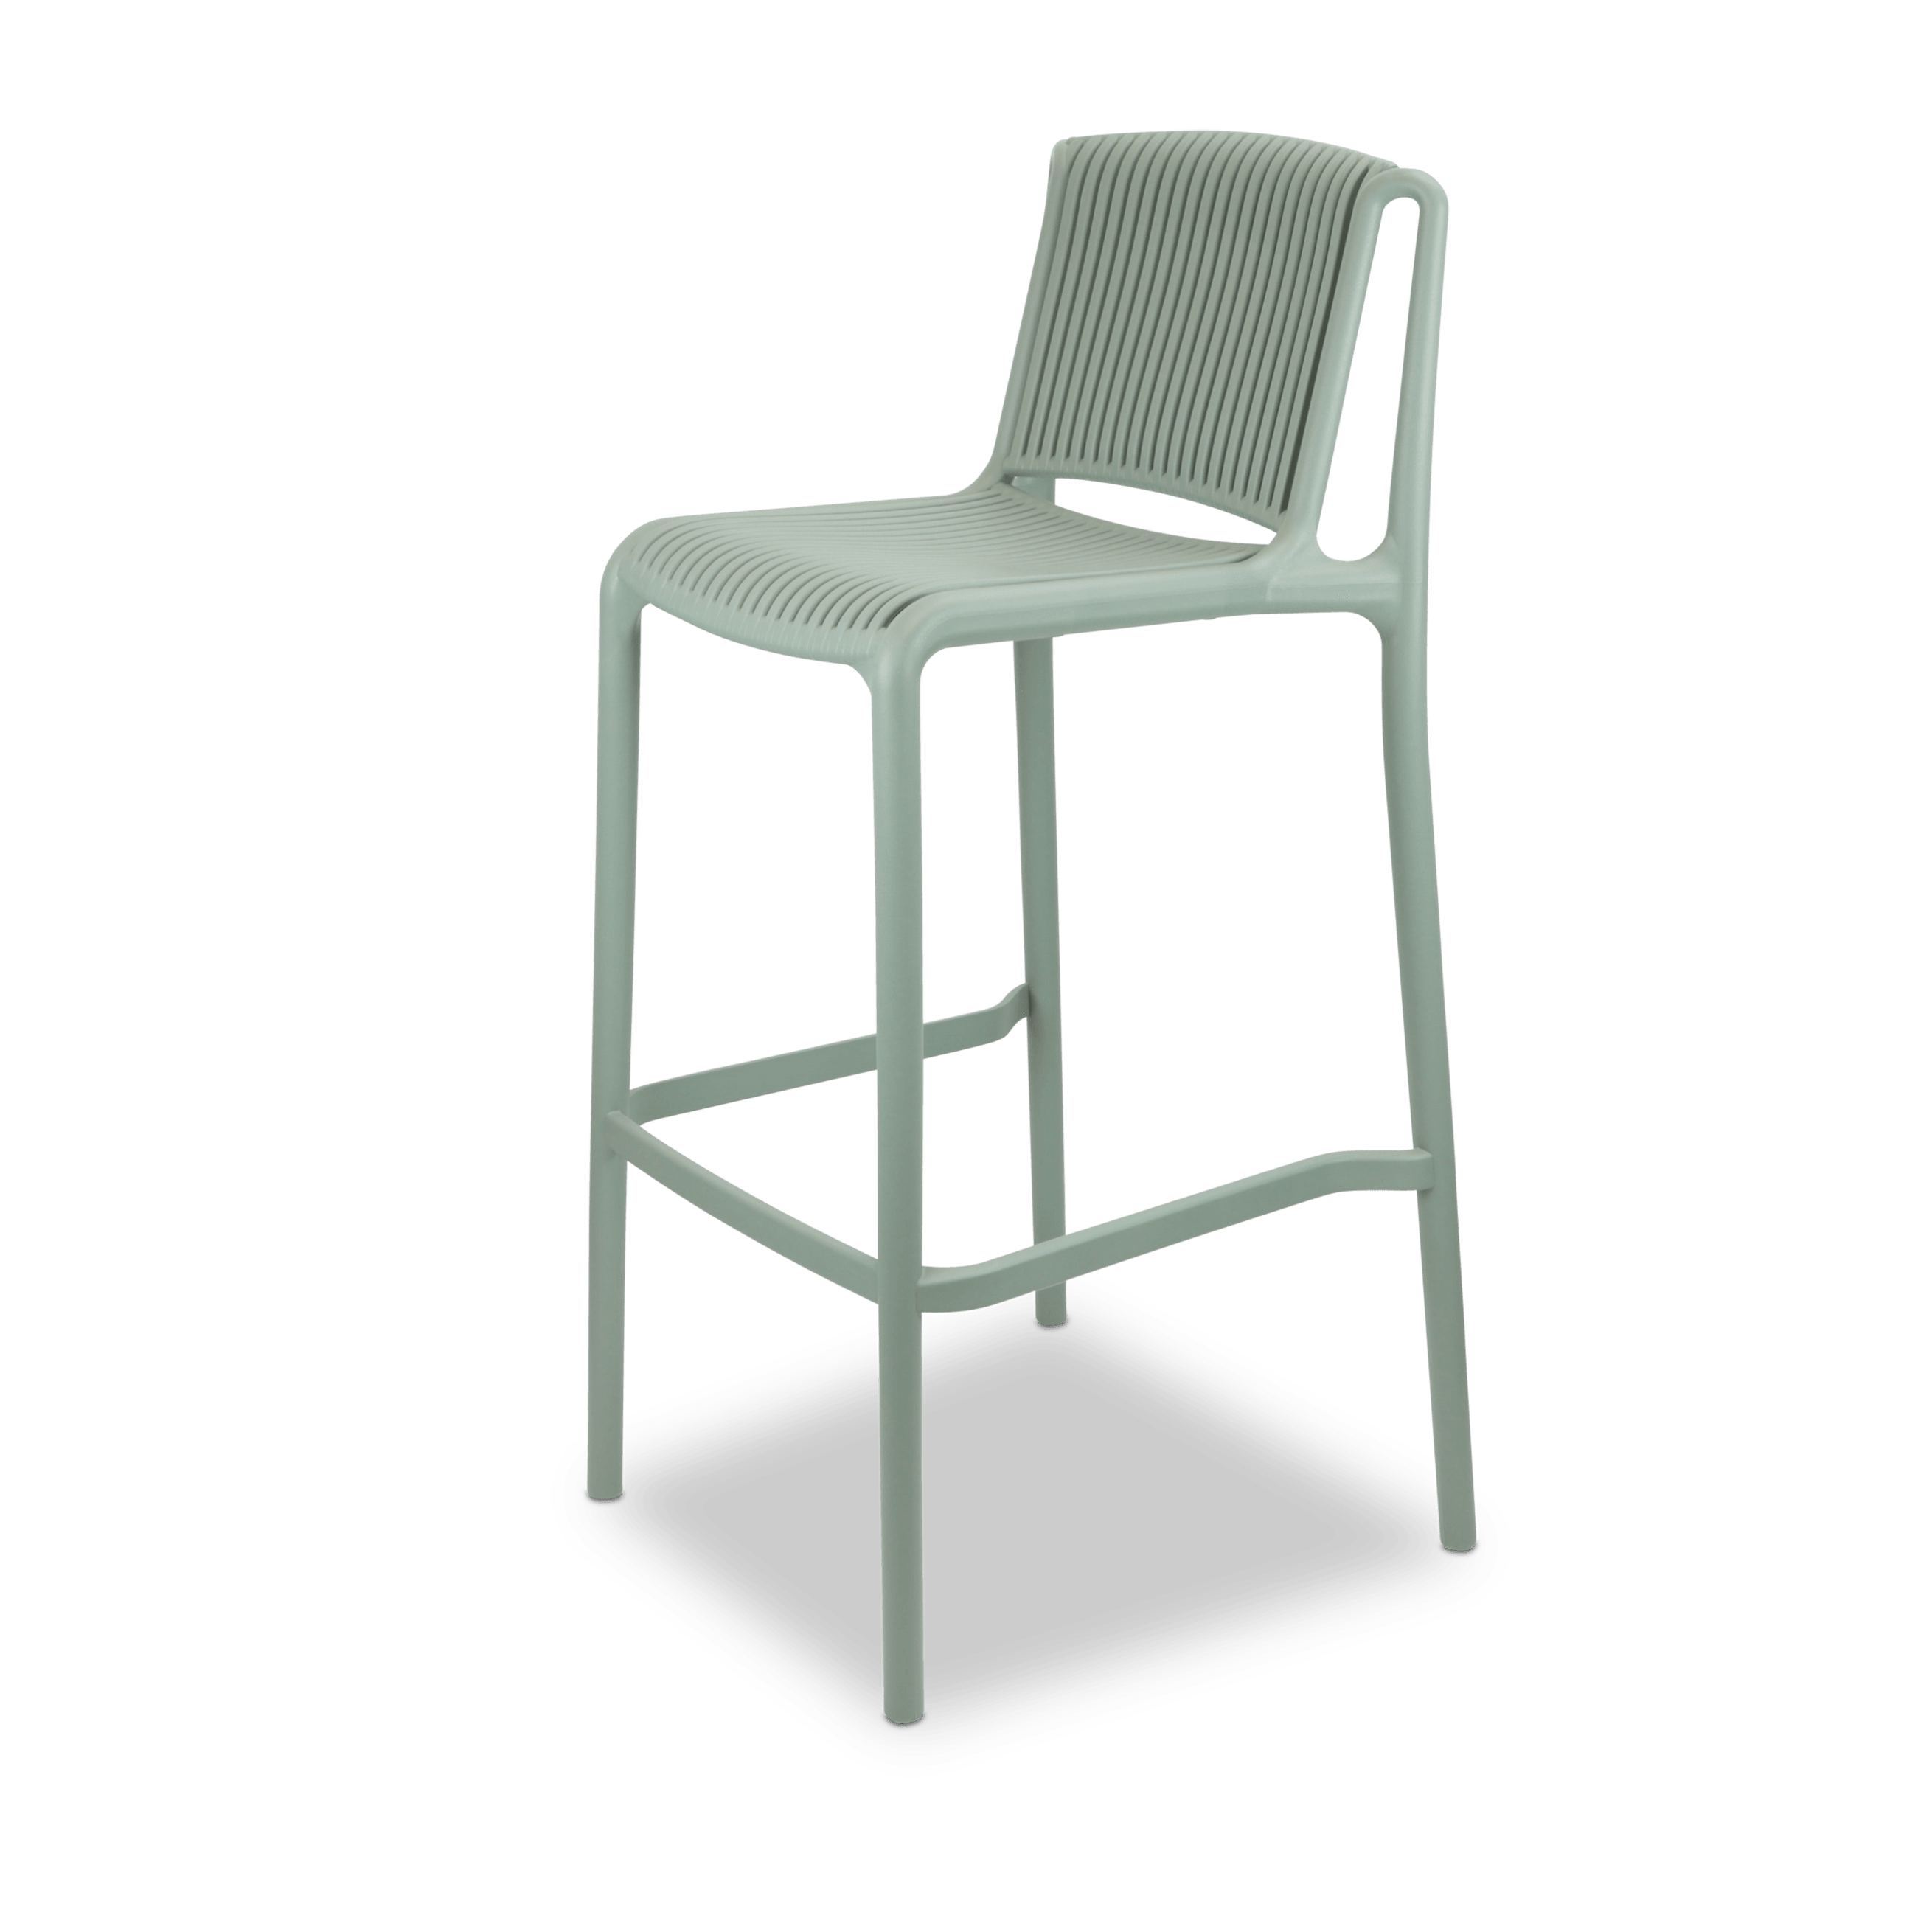 Cafe Collection Square 3pc Bar Suite in Gunmetal with UV Plastic Bar Stools (PP)